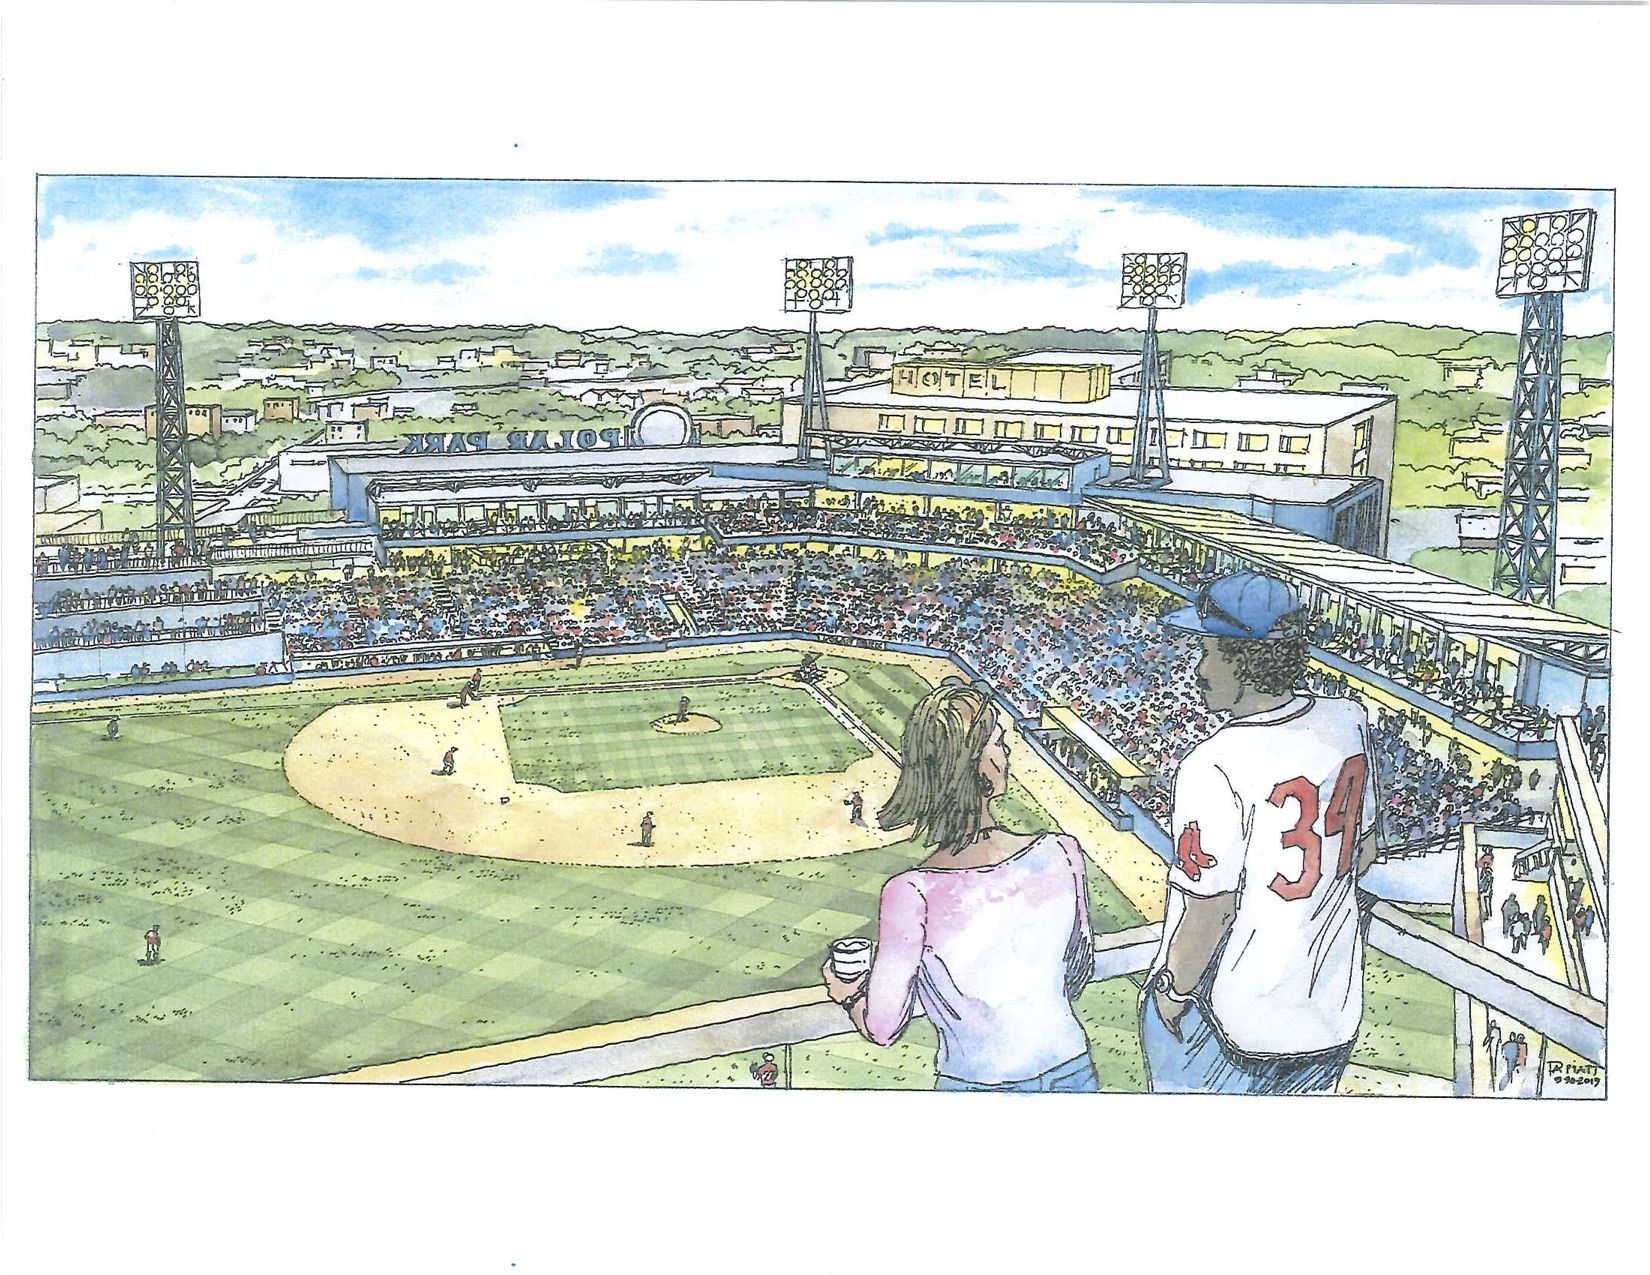 Architectural Firms To Pitch Designs For Worcester Ballpark